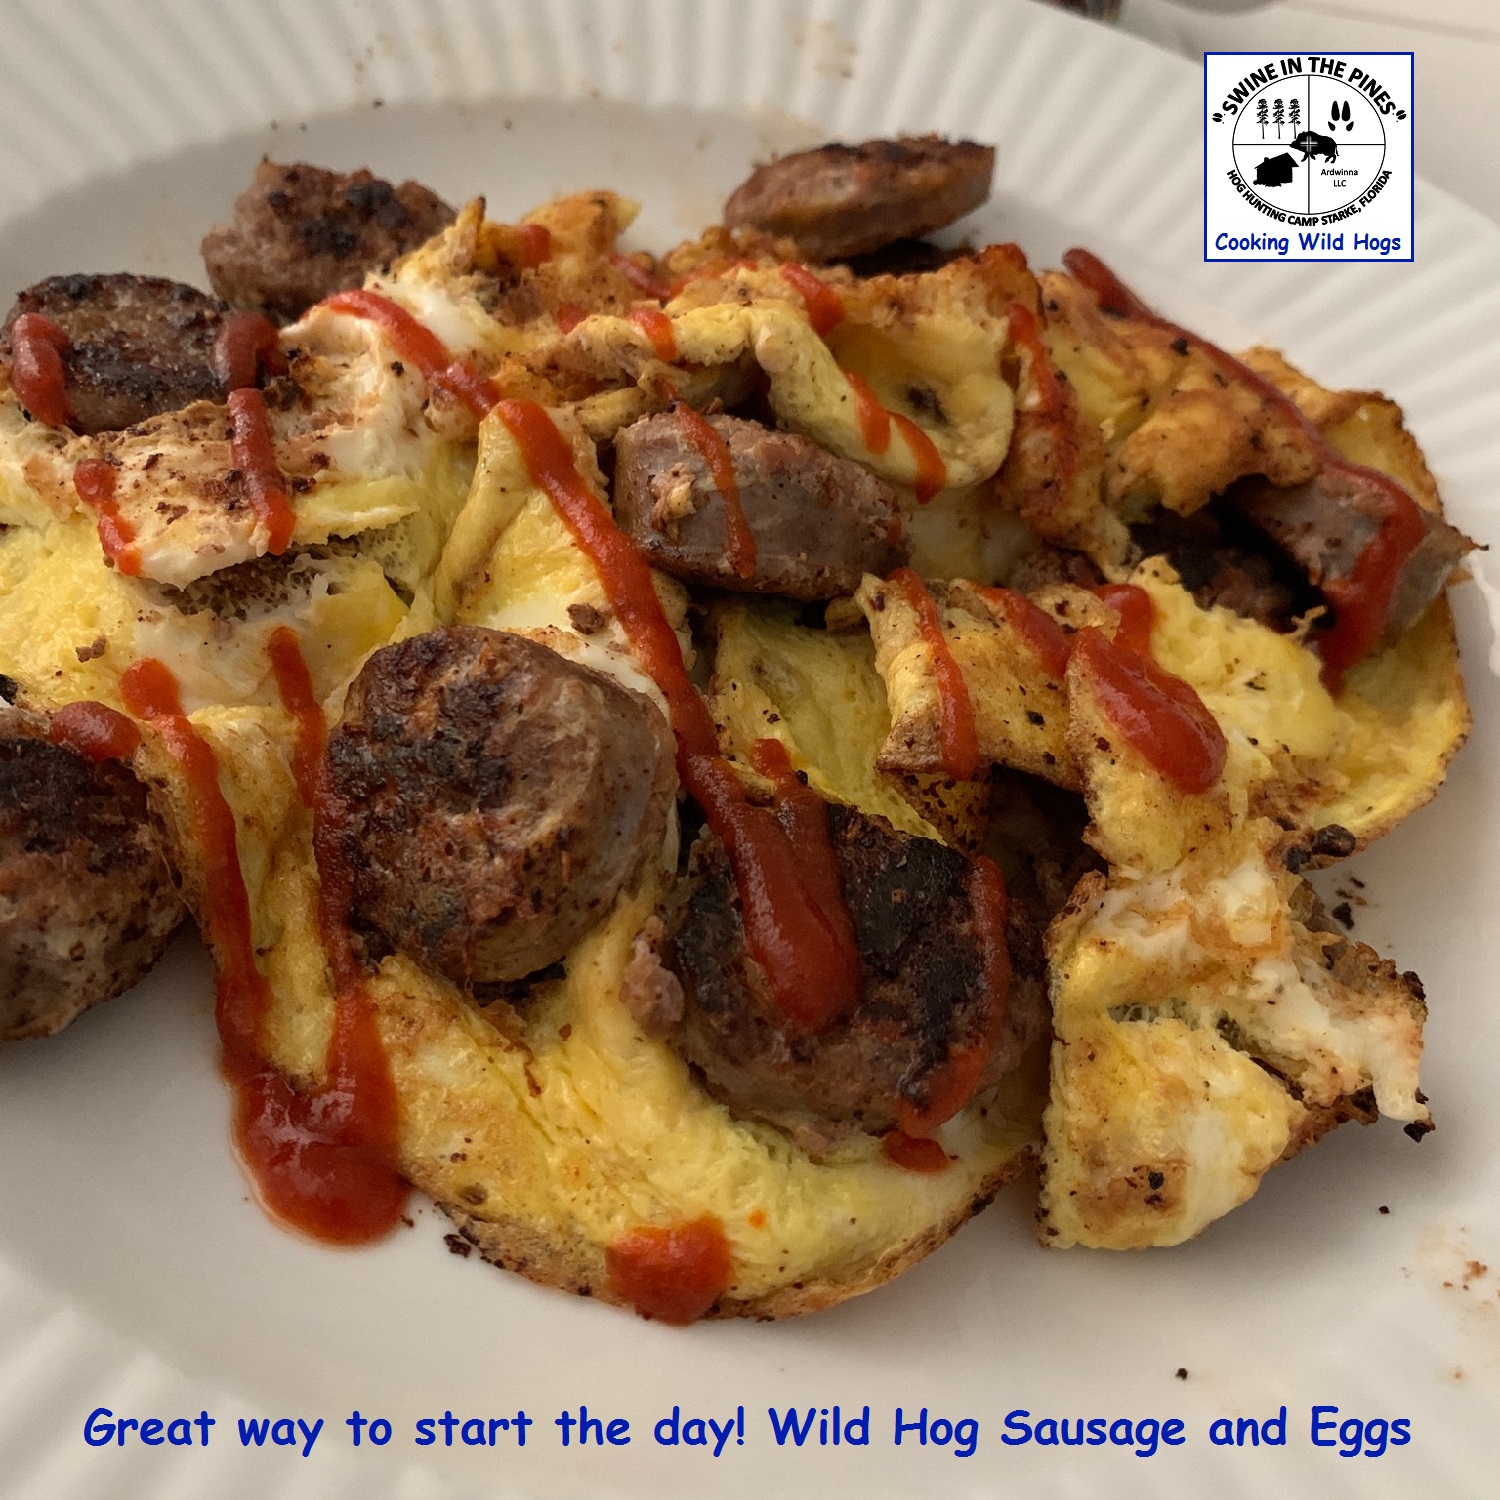 Great way to start the day! Wild Hog Sausage and Eggs